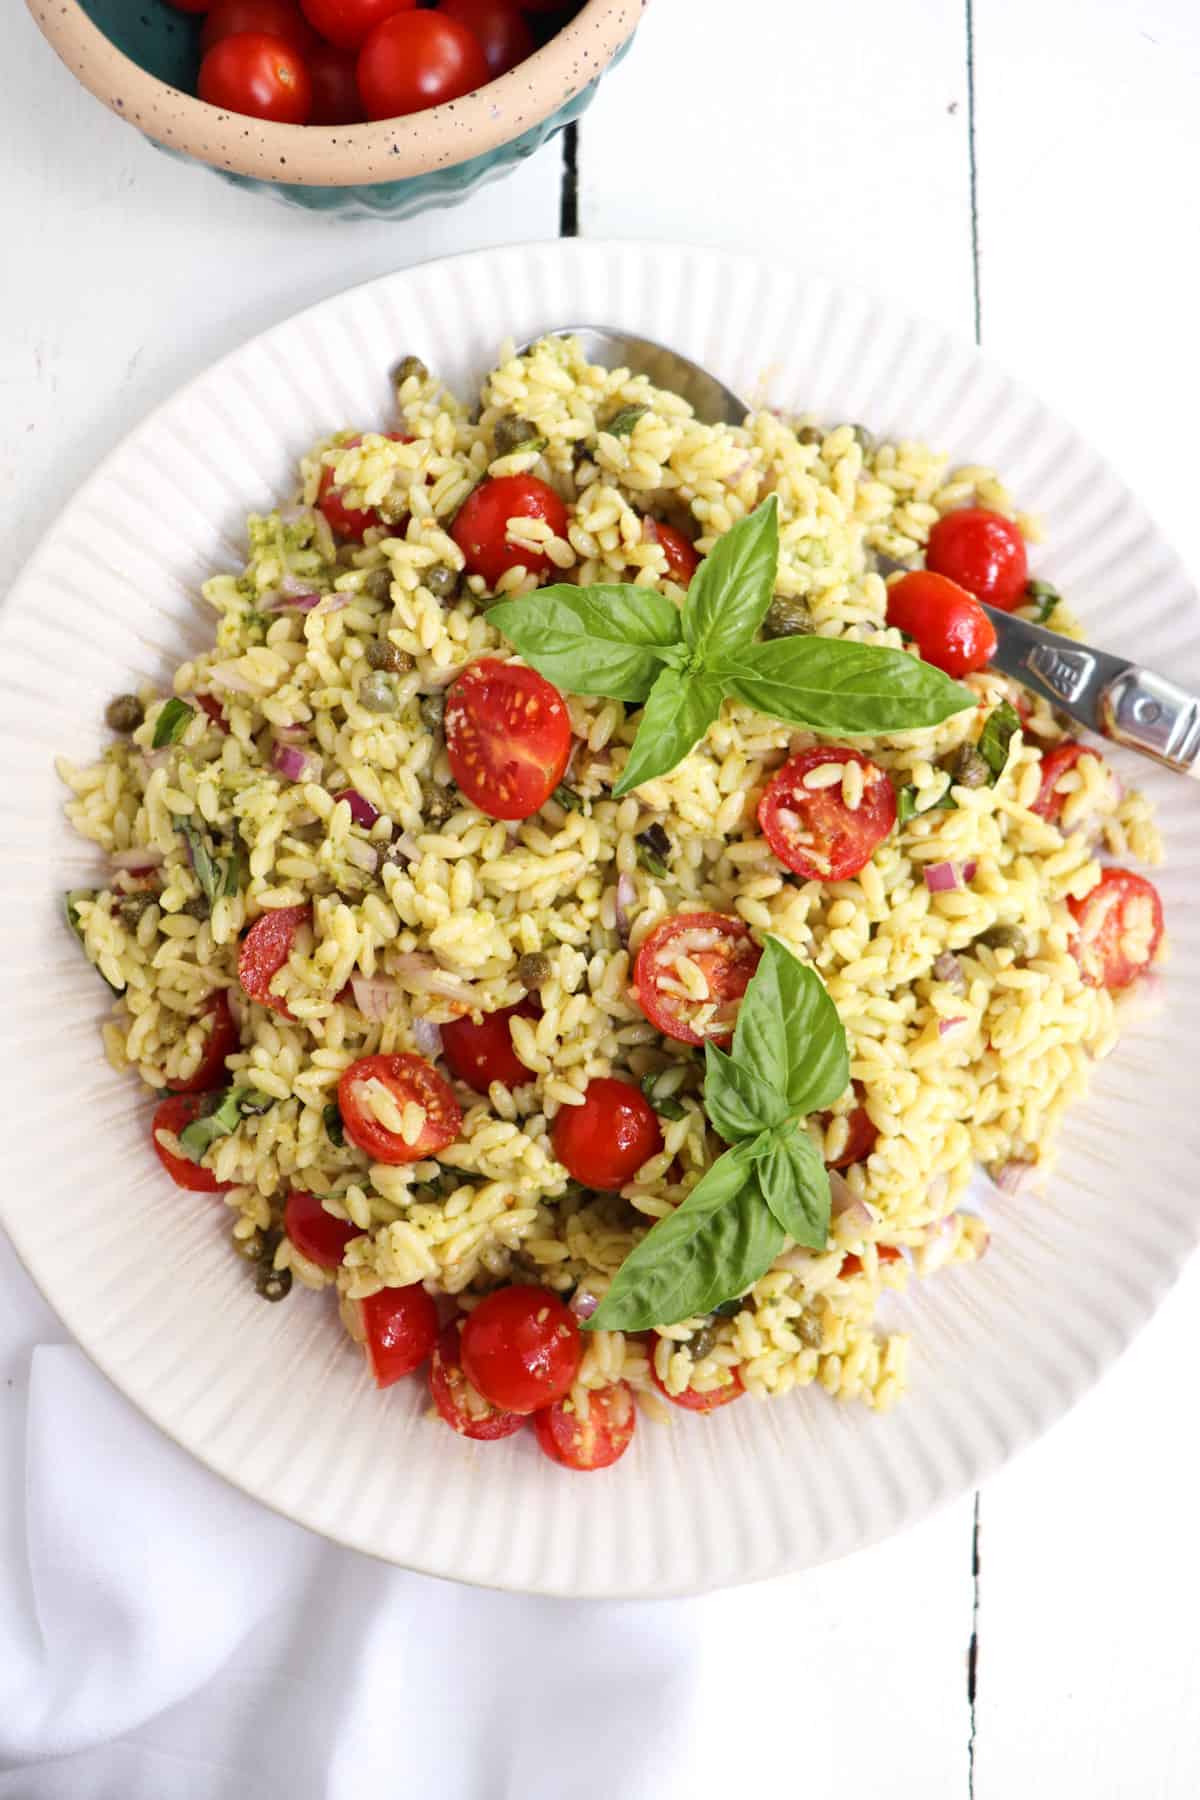 orzo salad on a plate with tomatoes in a bowl above.